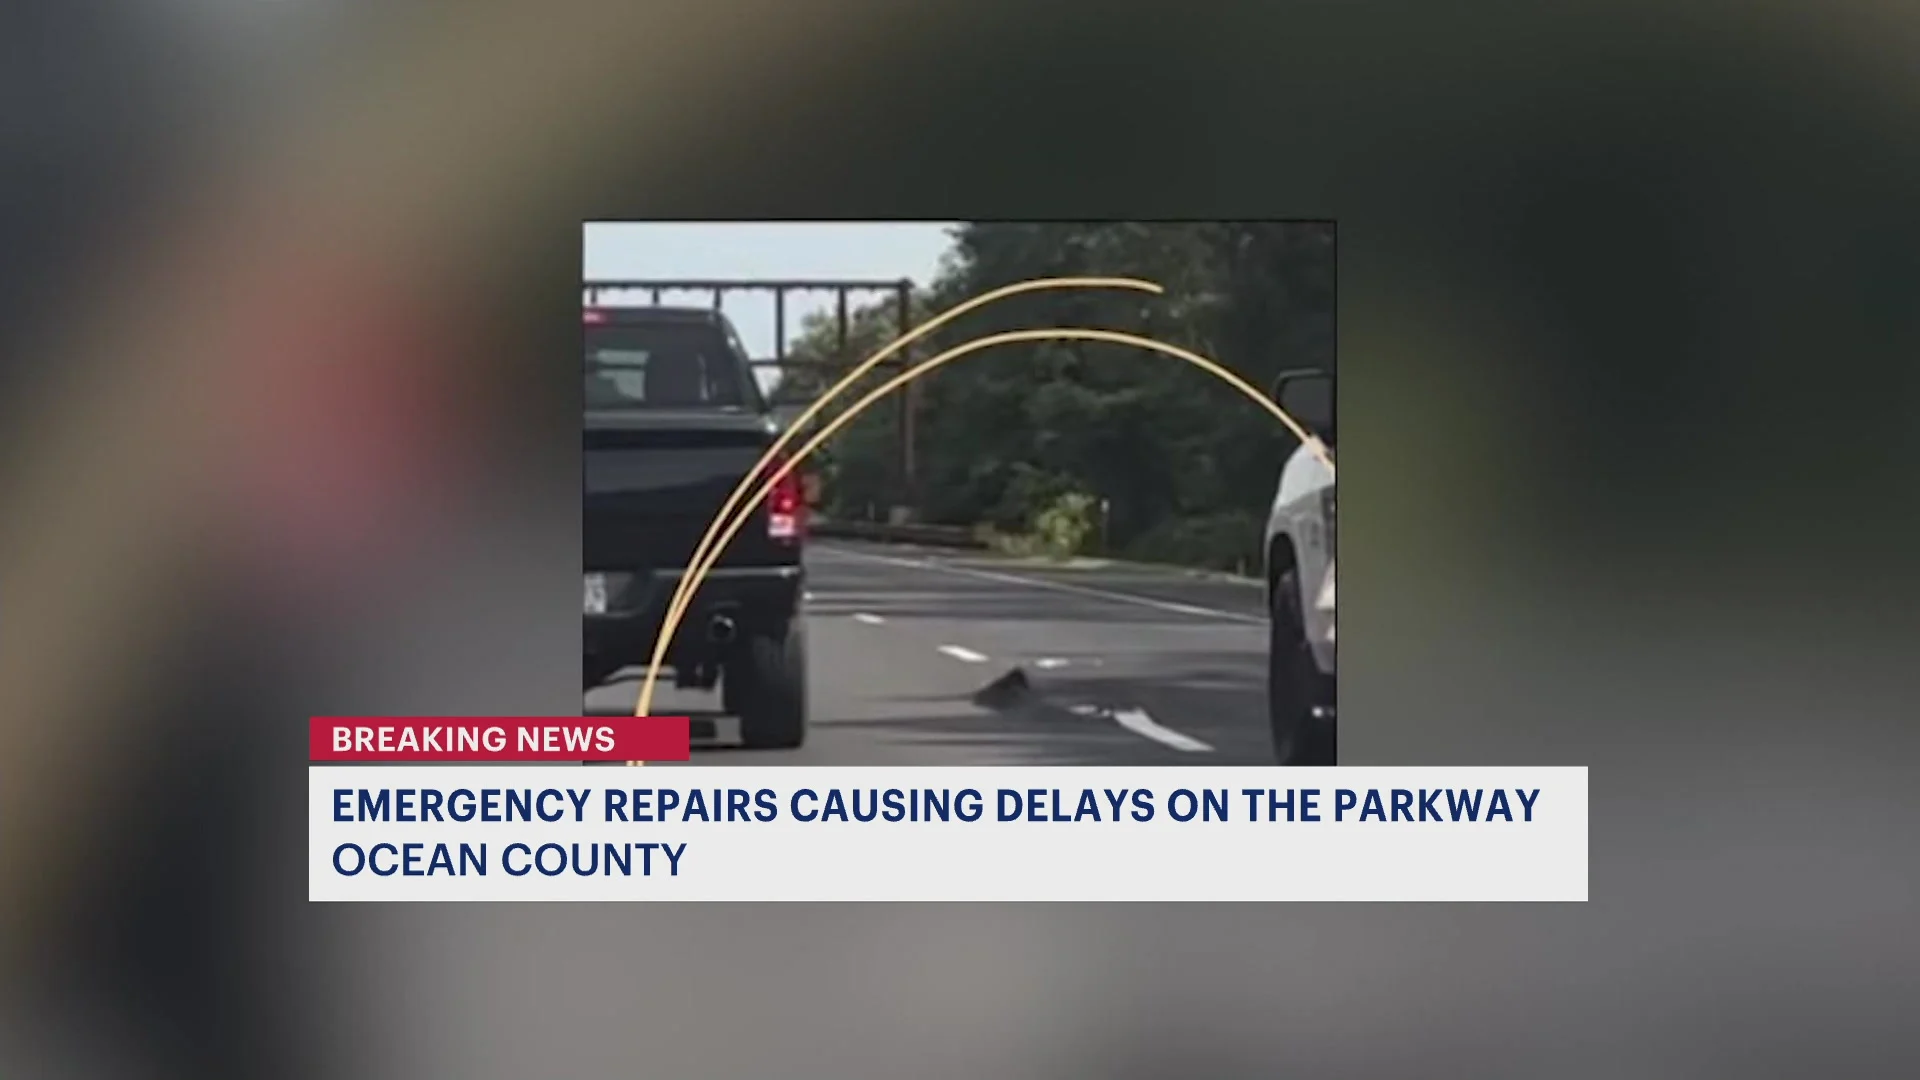 Buckling roadway causes heavy delays on Garden State Parkway